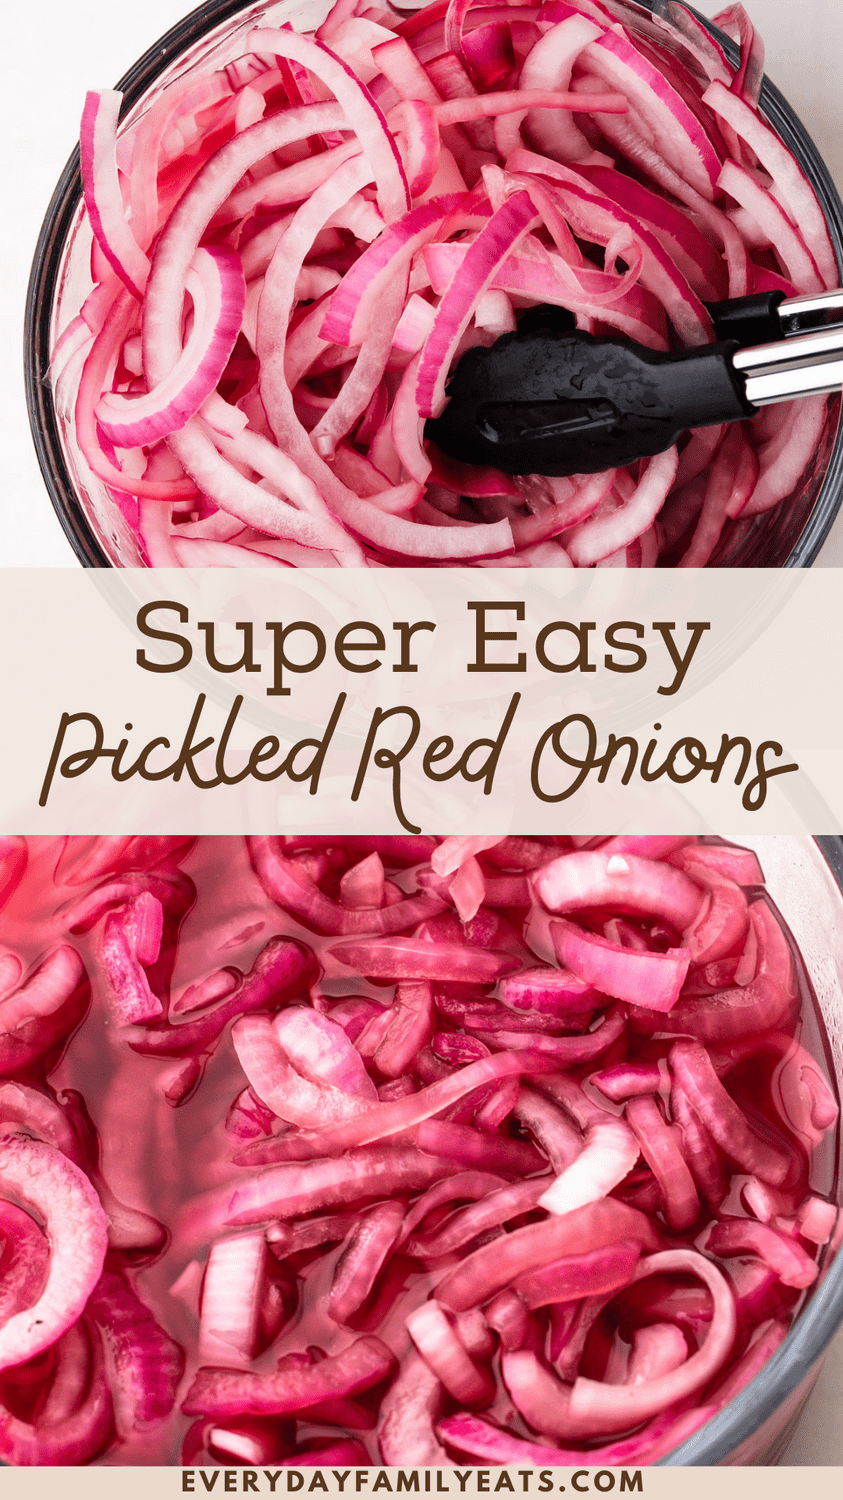 Quick Pickled Red Onions - Everyday Family Eats